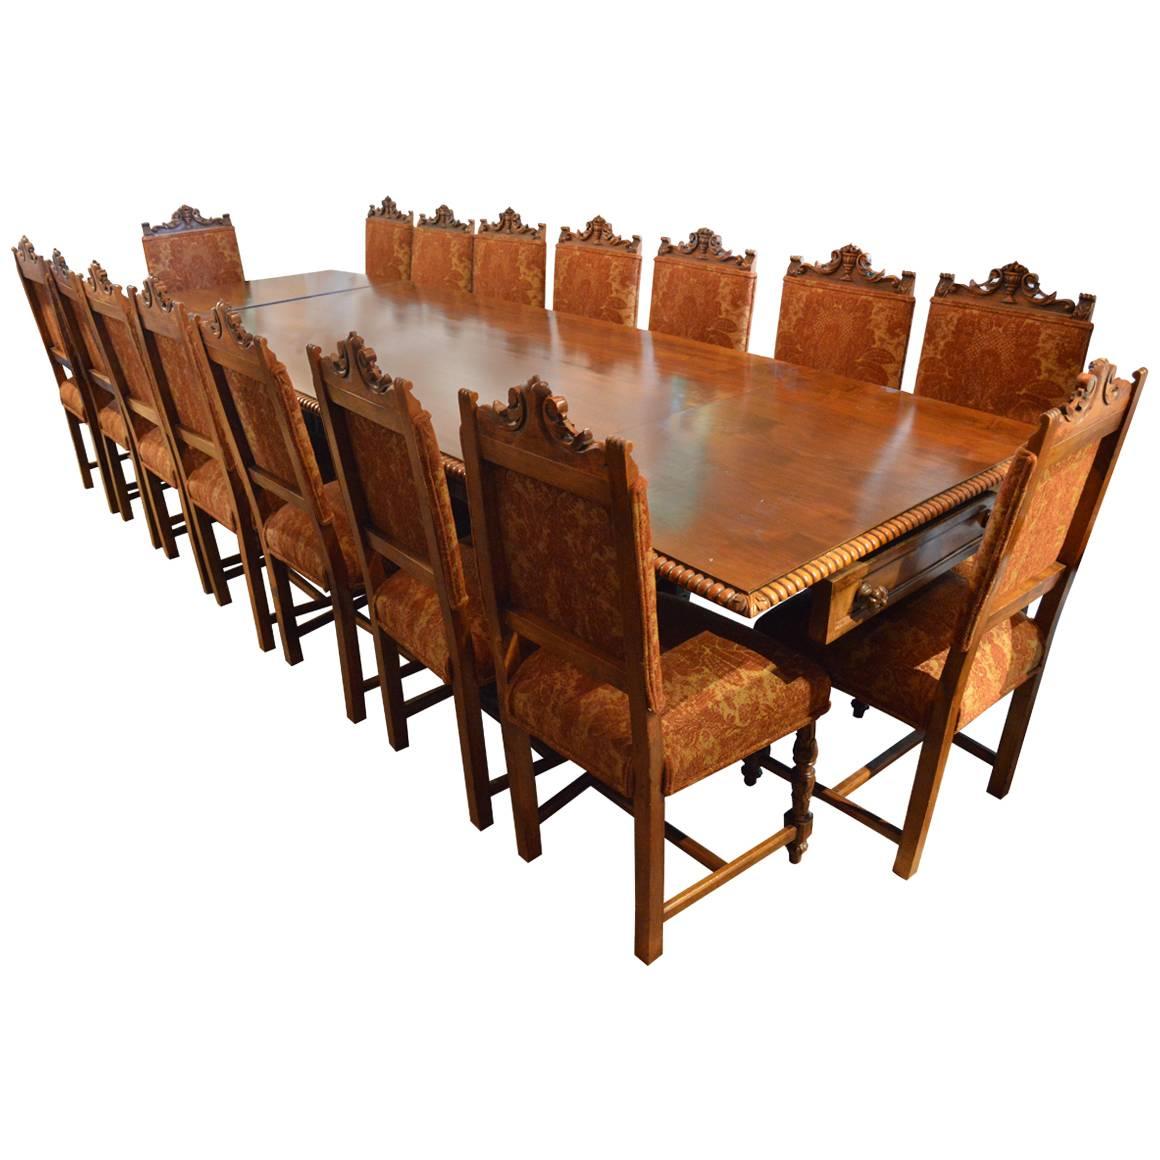 Very Large 19th Century Italian Hand-Carved Dining Set with 18 Chairs